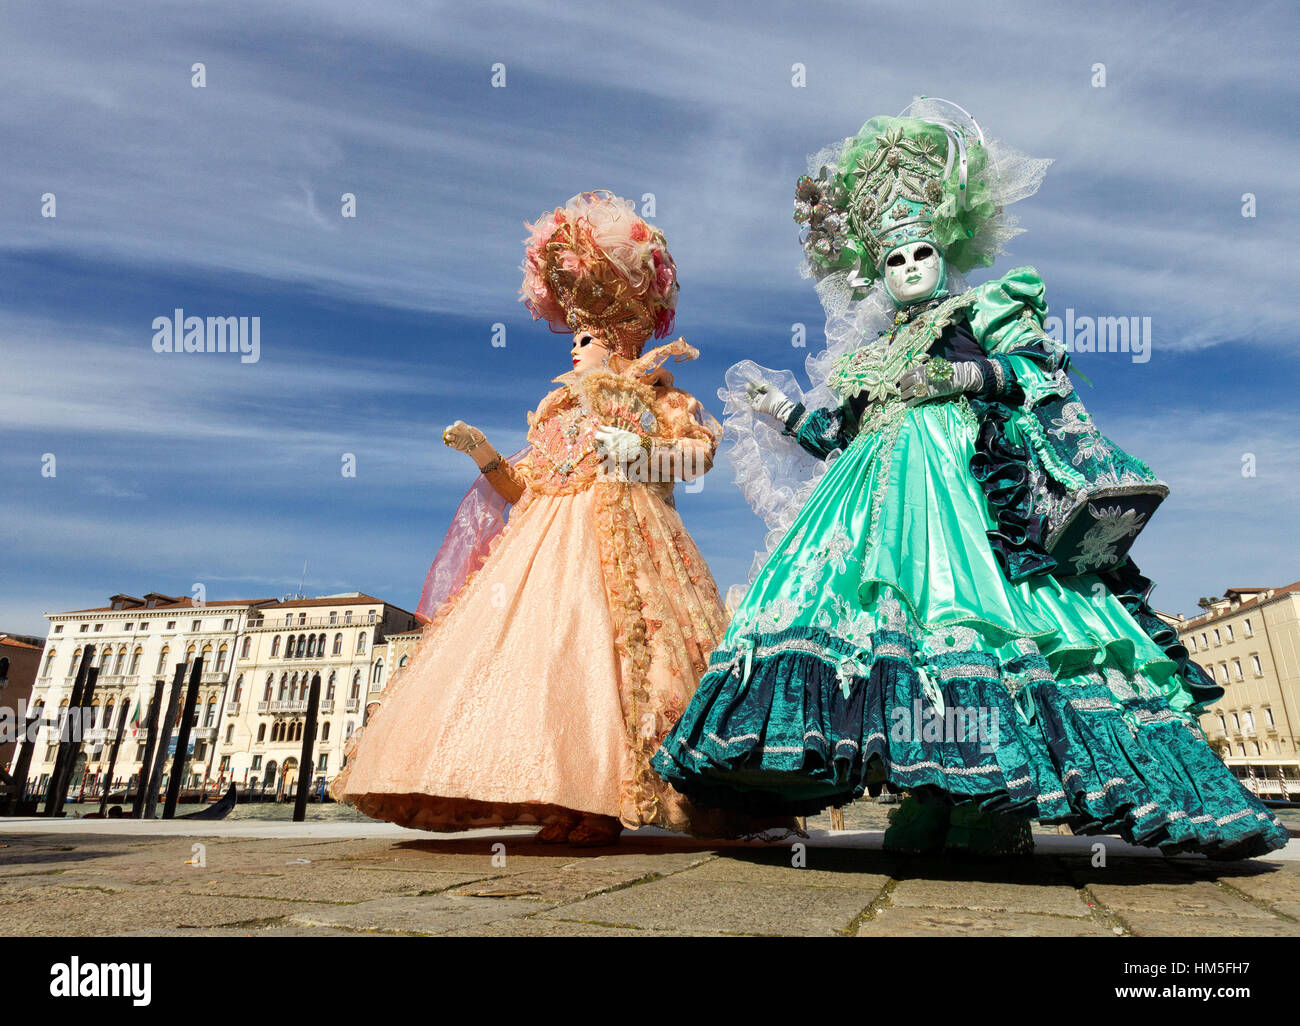 VENICE - FEBRUARY 7: Costumed people on the Piazza San Marco during Venice Carnival on February 7, 2013 in Venice, Italy. This year the Carnival was h Stock Photo